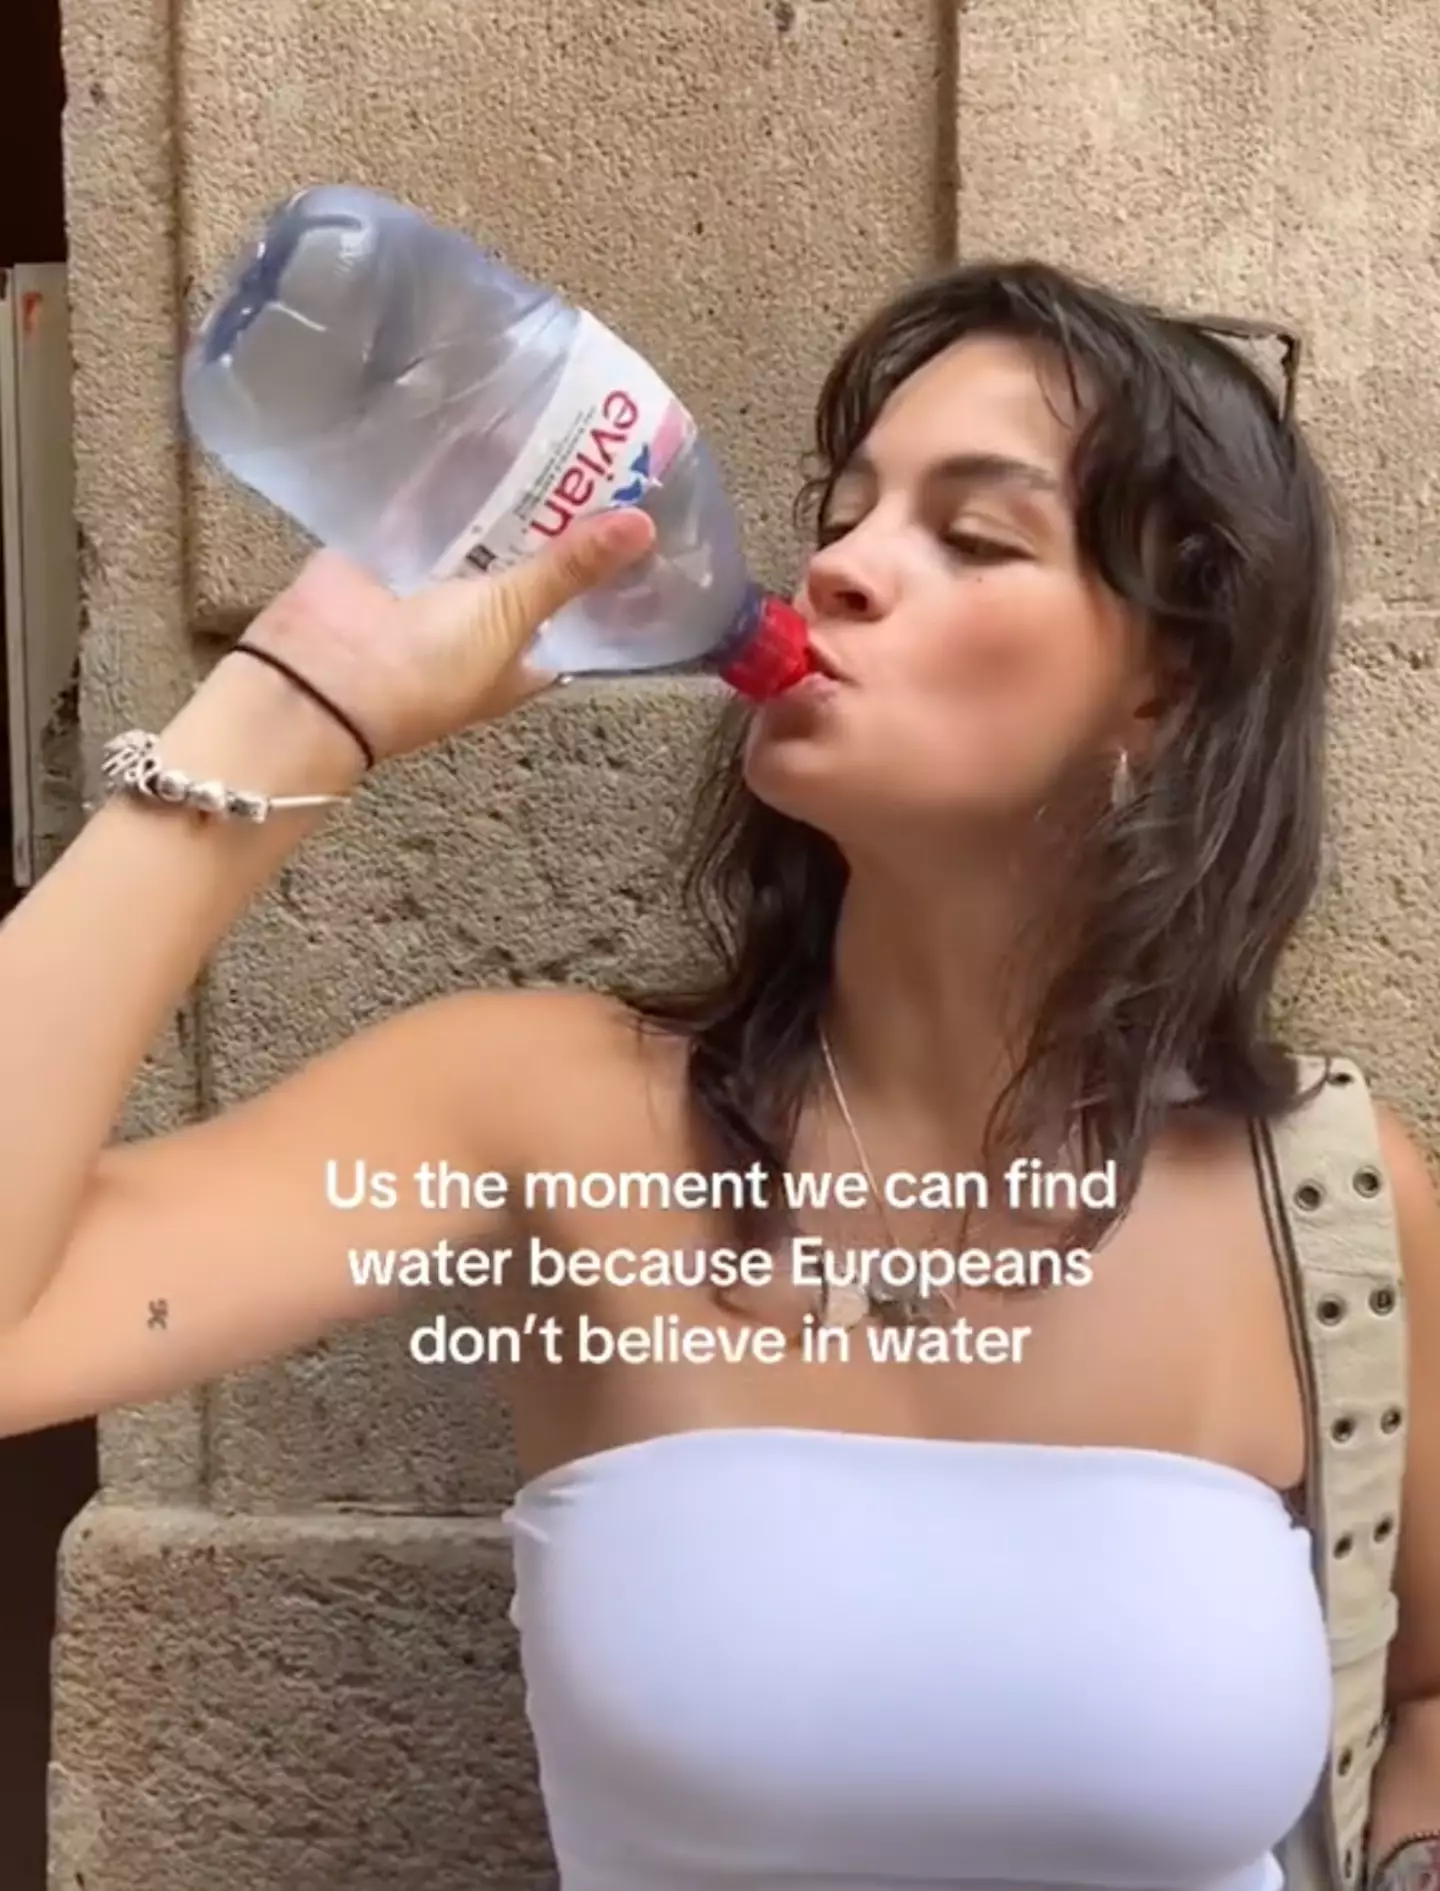 The video shows several American tourists desperately drinking from their water bottles.